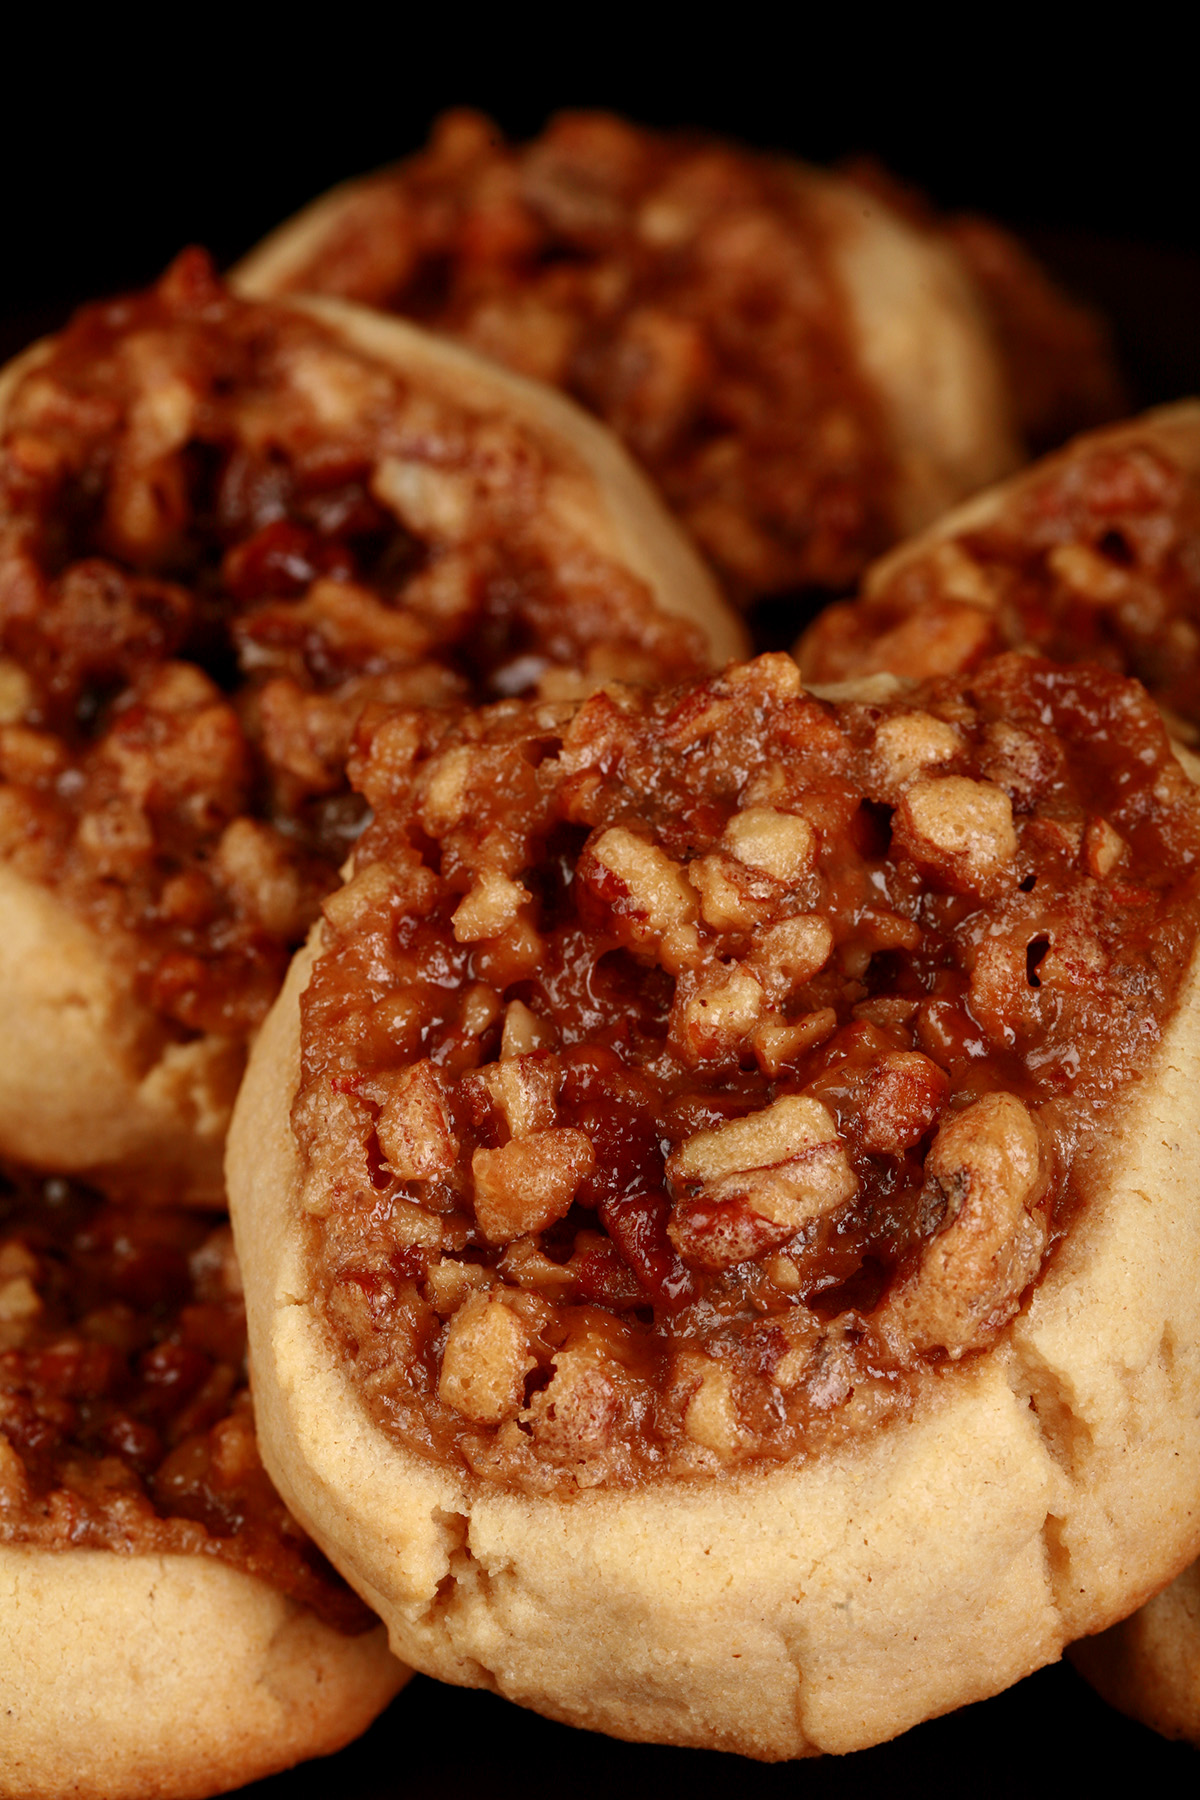 Several Gluten-Free Pecan Pie cookies on a white plate. They are golden brown, with a pecan and brown sugar topping.